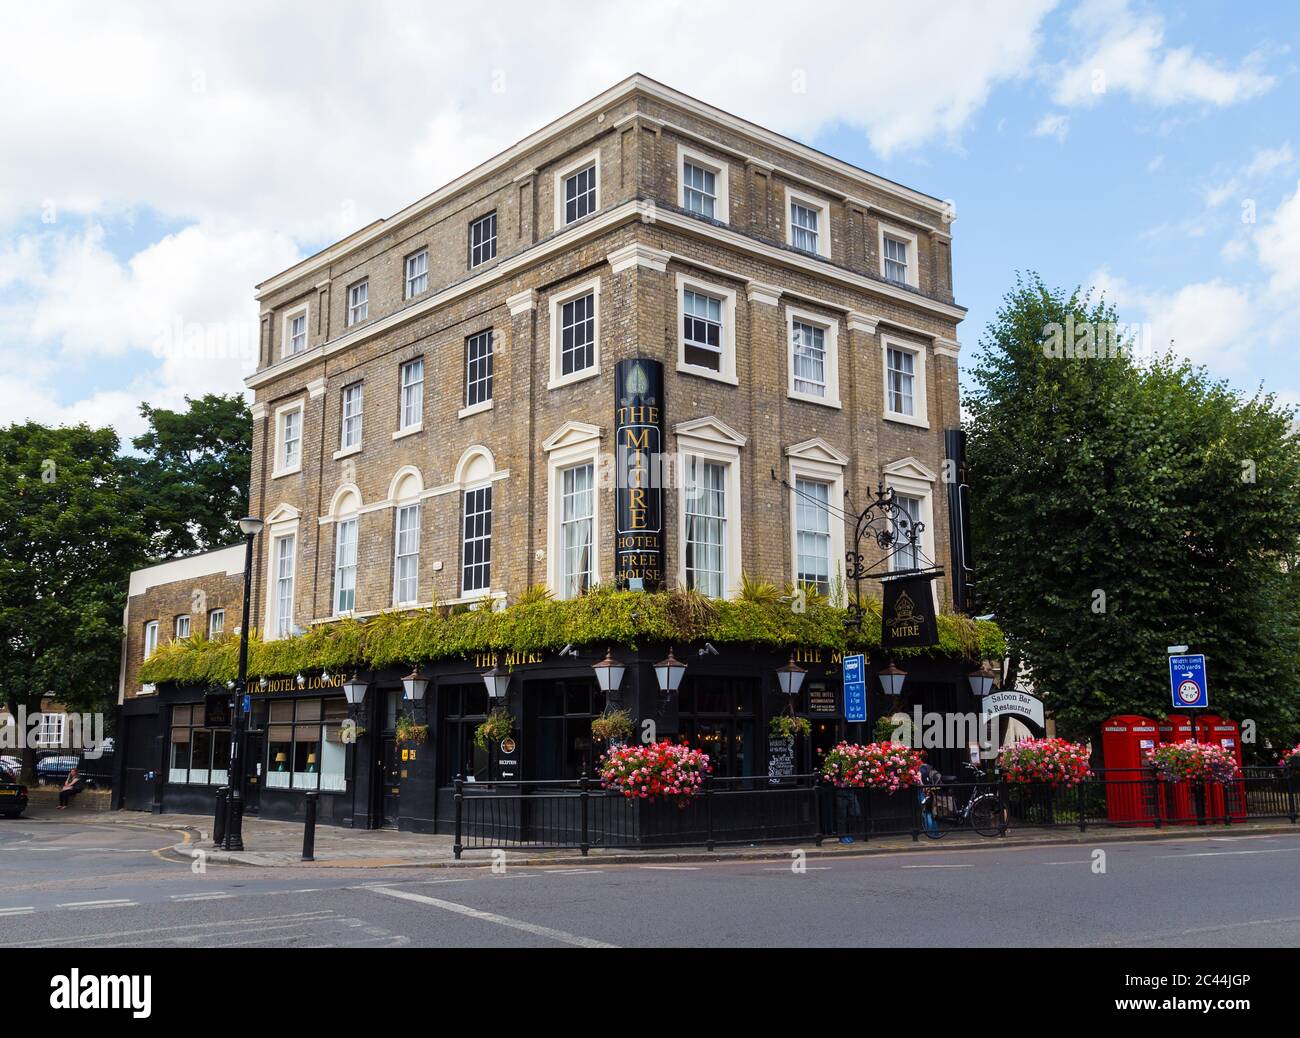 LONDON, UK - 21ST JULY 2015: The outside of the Mitre pub in London during the day. People can be seen outside. Stock Photo